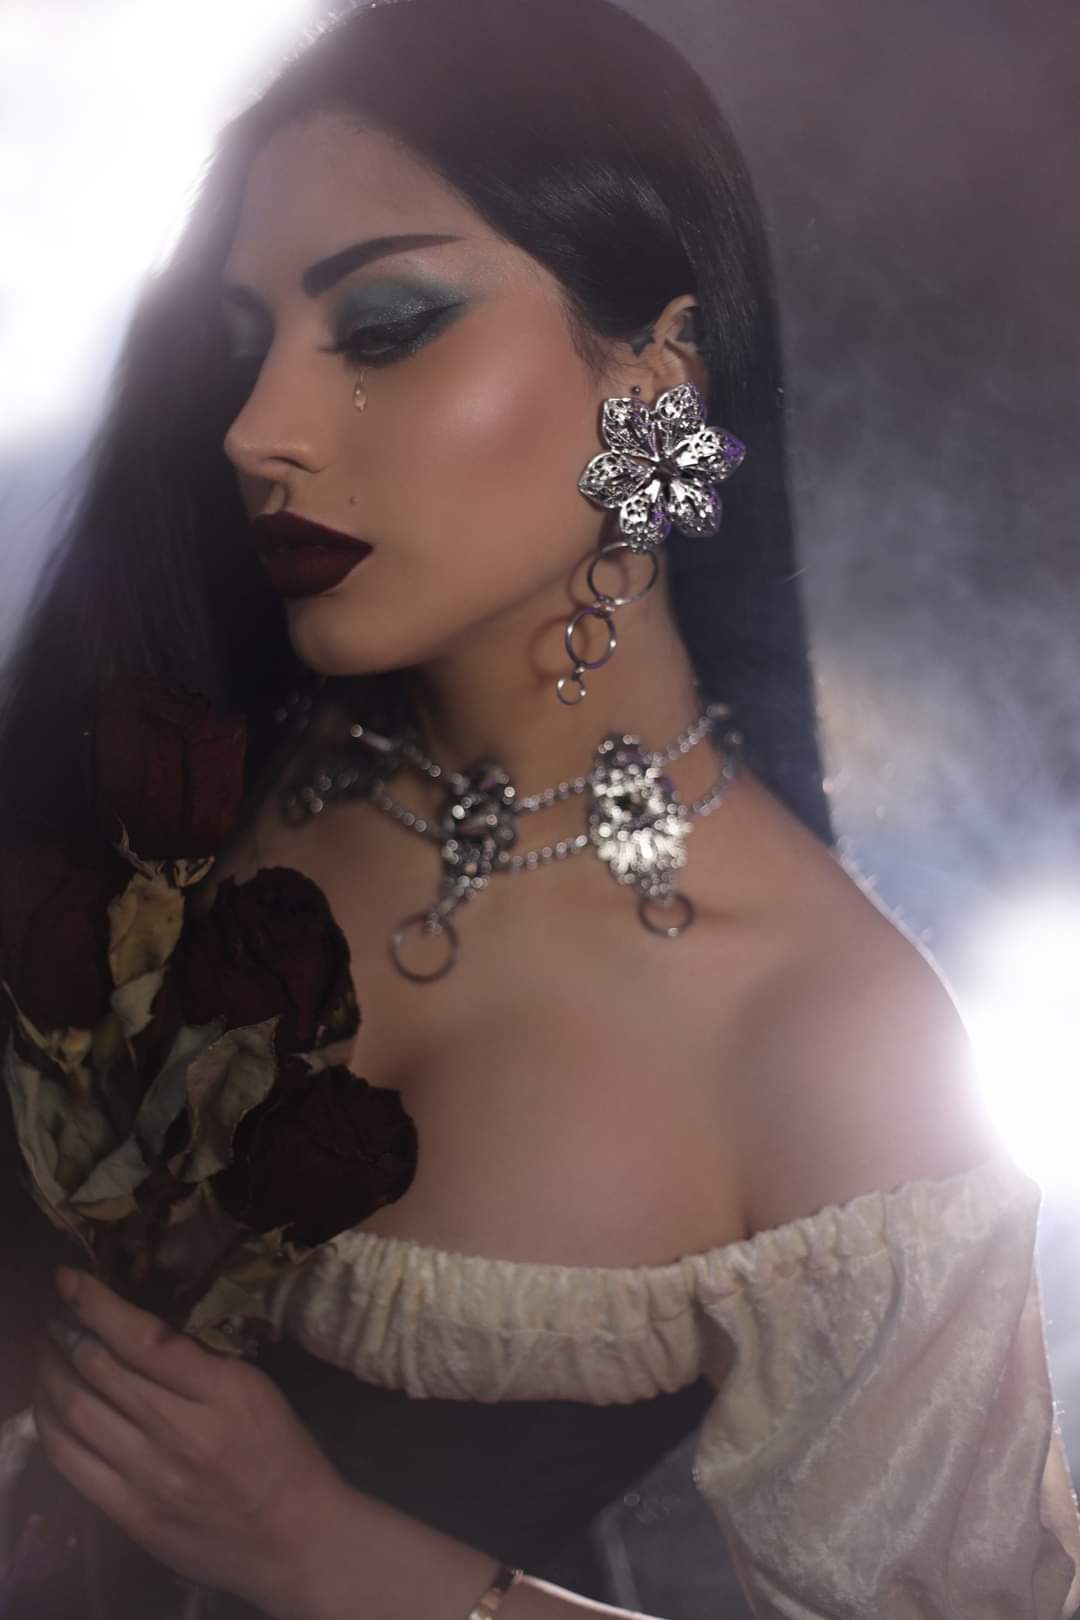 An alt model exudes dark sophistication in Myril Jewels' punk studded floral earrings and matching choker, embodying the spirit of Neo Gothic elegance. These handcrafted pieces, perfect for gothic and alternative fashion lovers, blend seamlessly with her dramatic makeup and the bouquet of dried roses she holds. Ideal for Halloween, gothic-chic events, or as a daring addition to any whimsigoth, witchcore, or minimal goth wardrobe